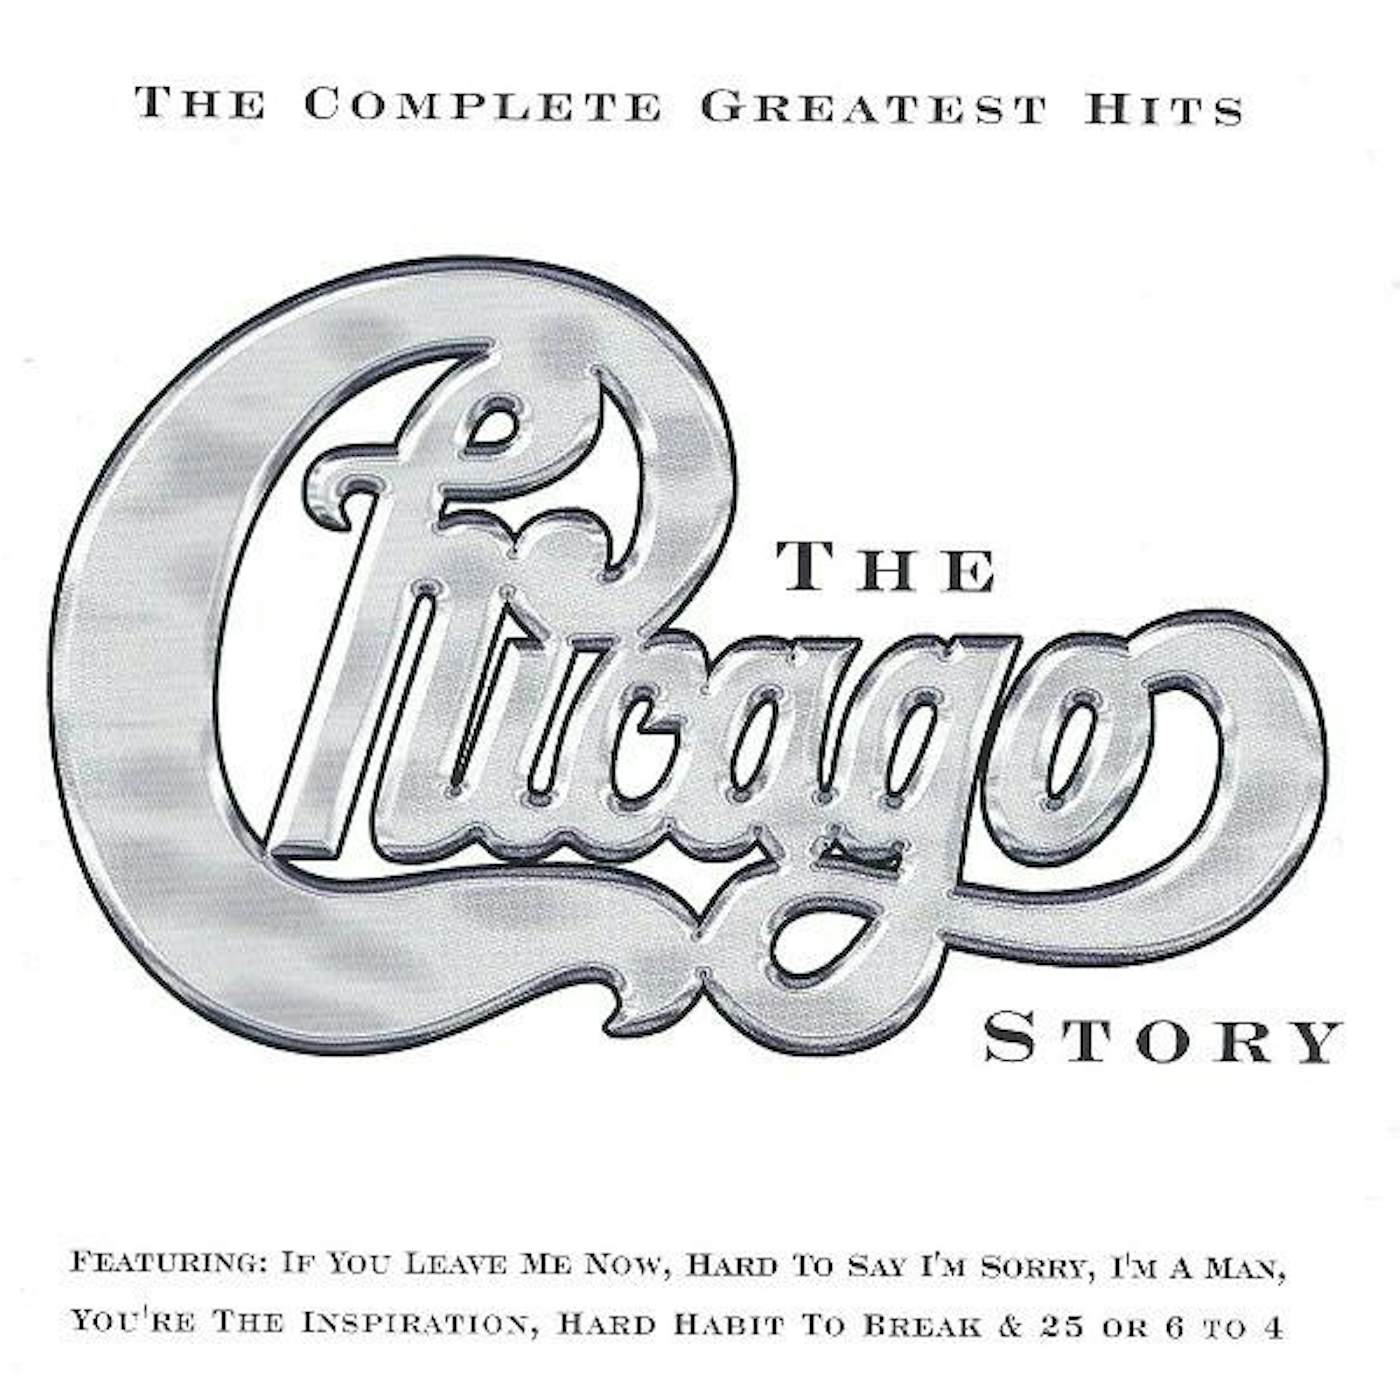 CHICAGO STORY: COMPLETE GREATEST HITS CD